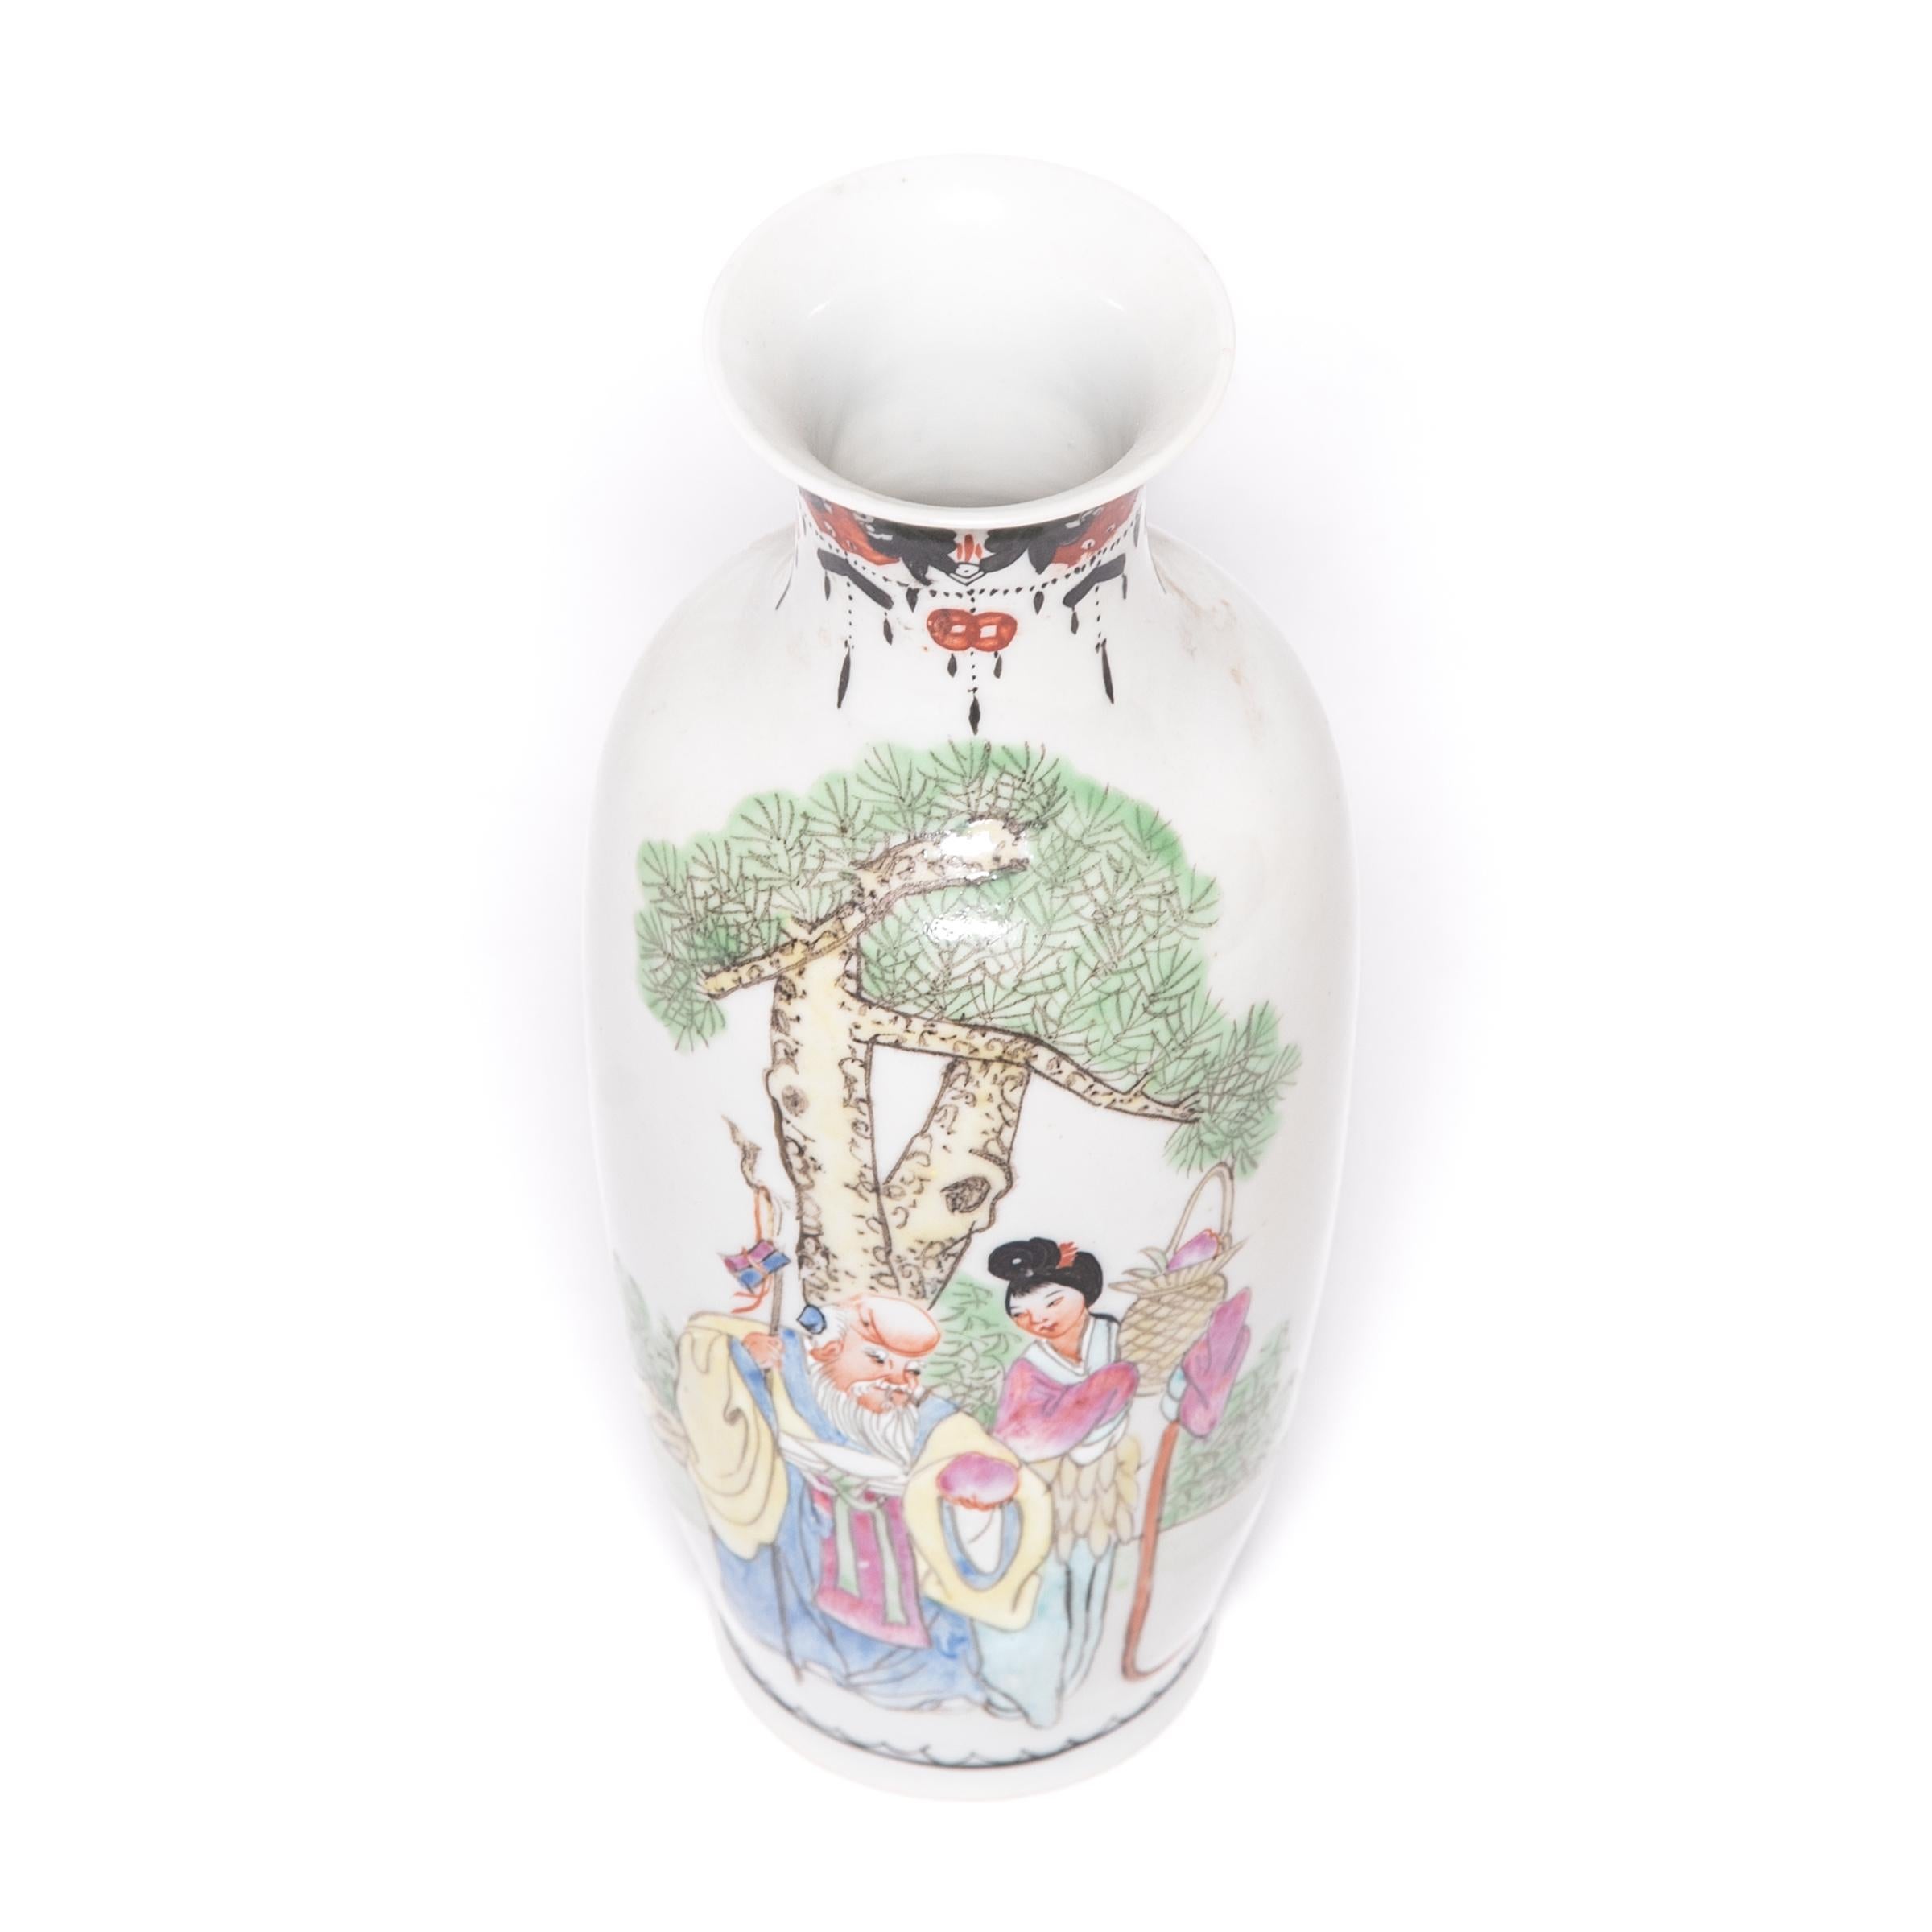 Pair of Petite Chinese Famille Rose Longevity Vases, c. 1900 For Sale 4